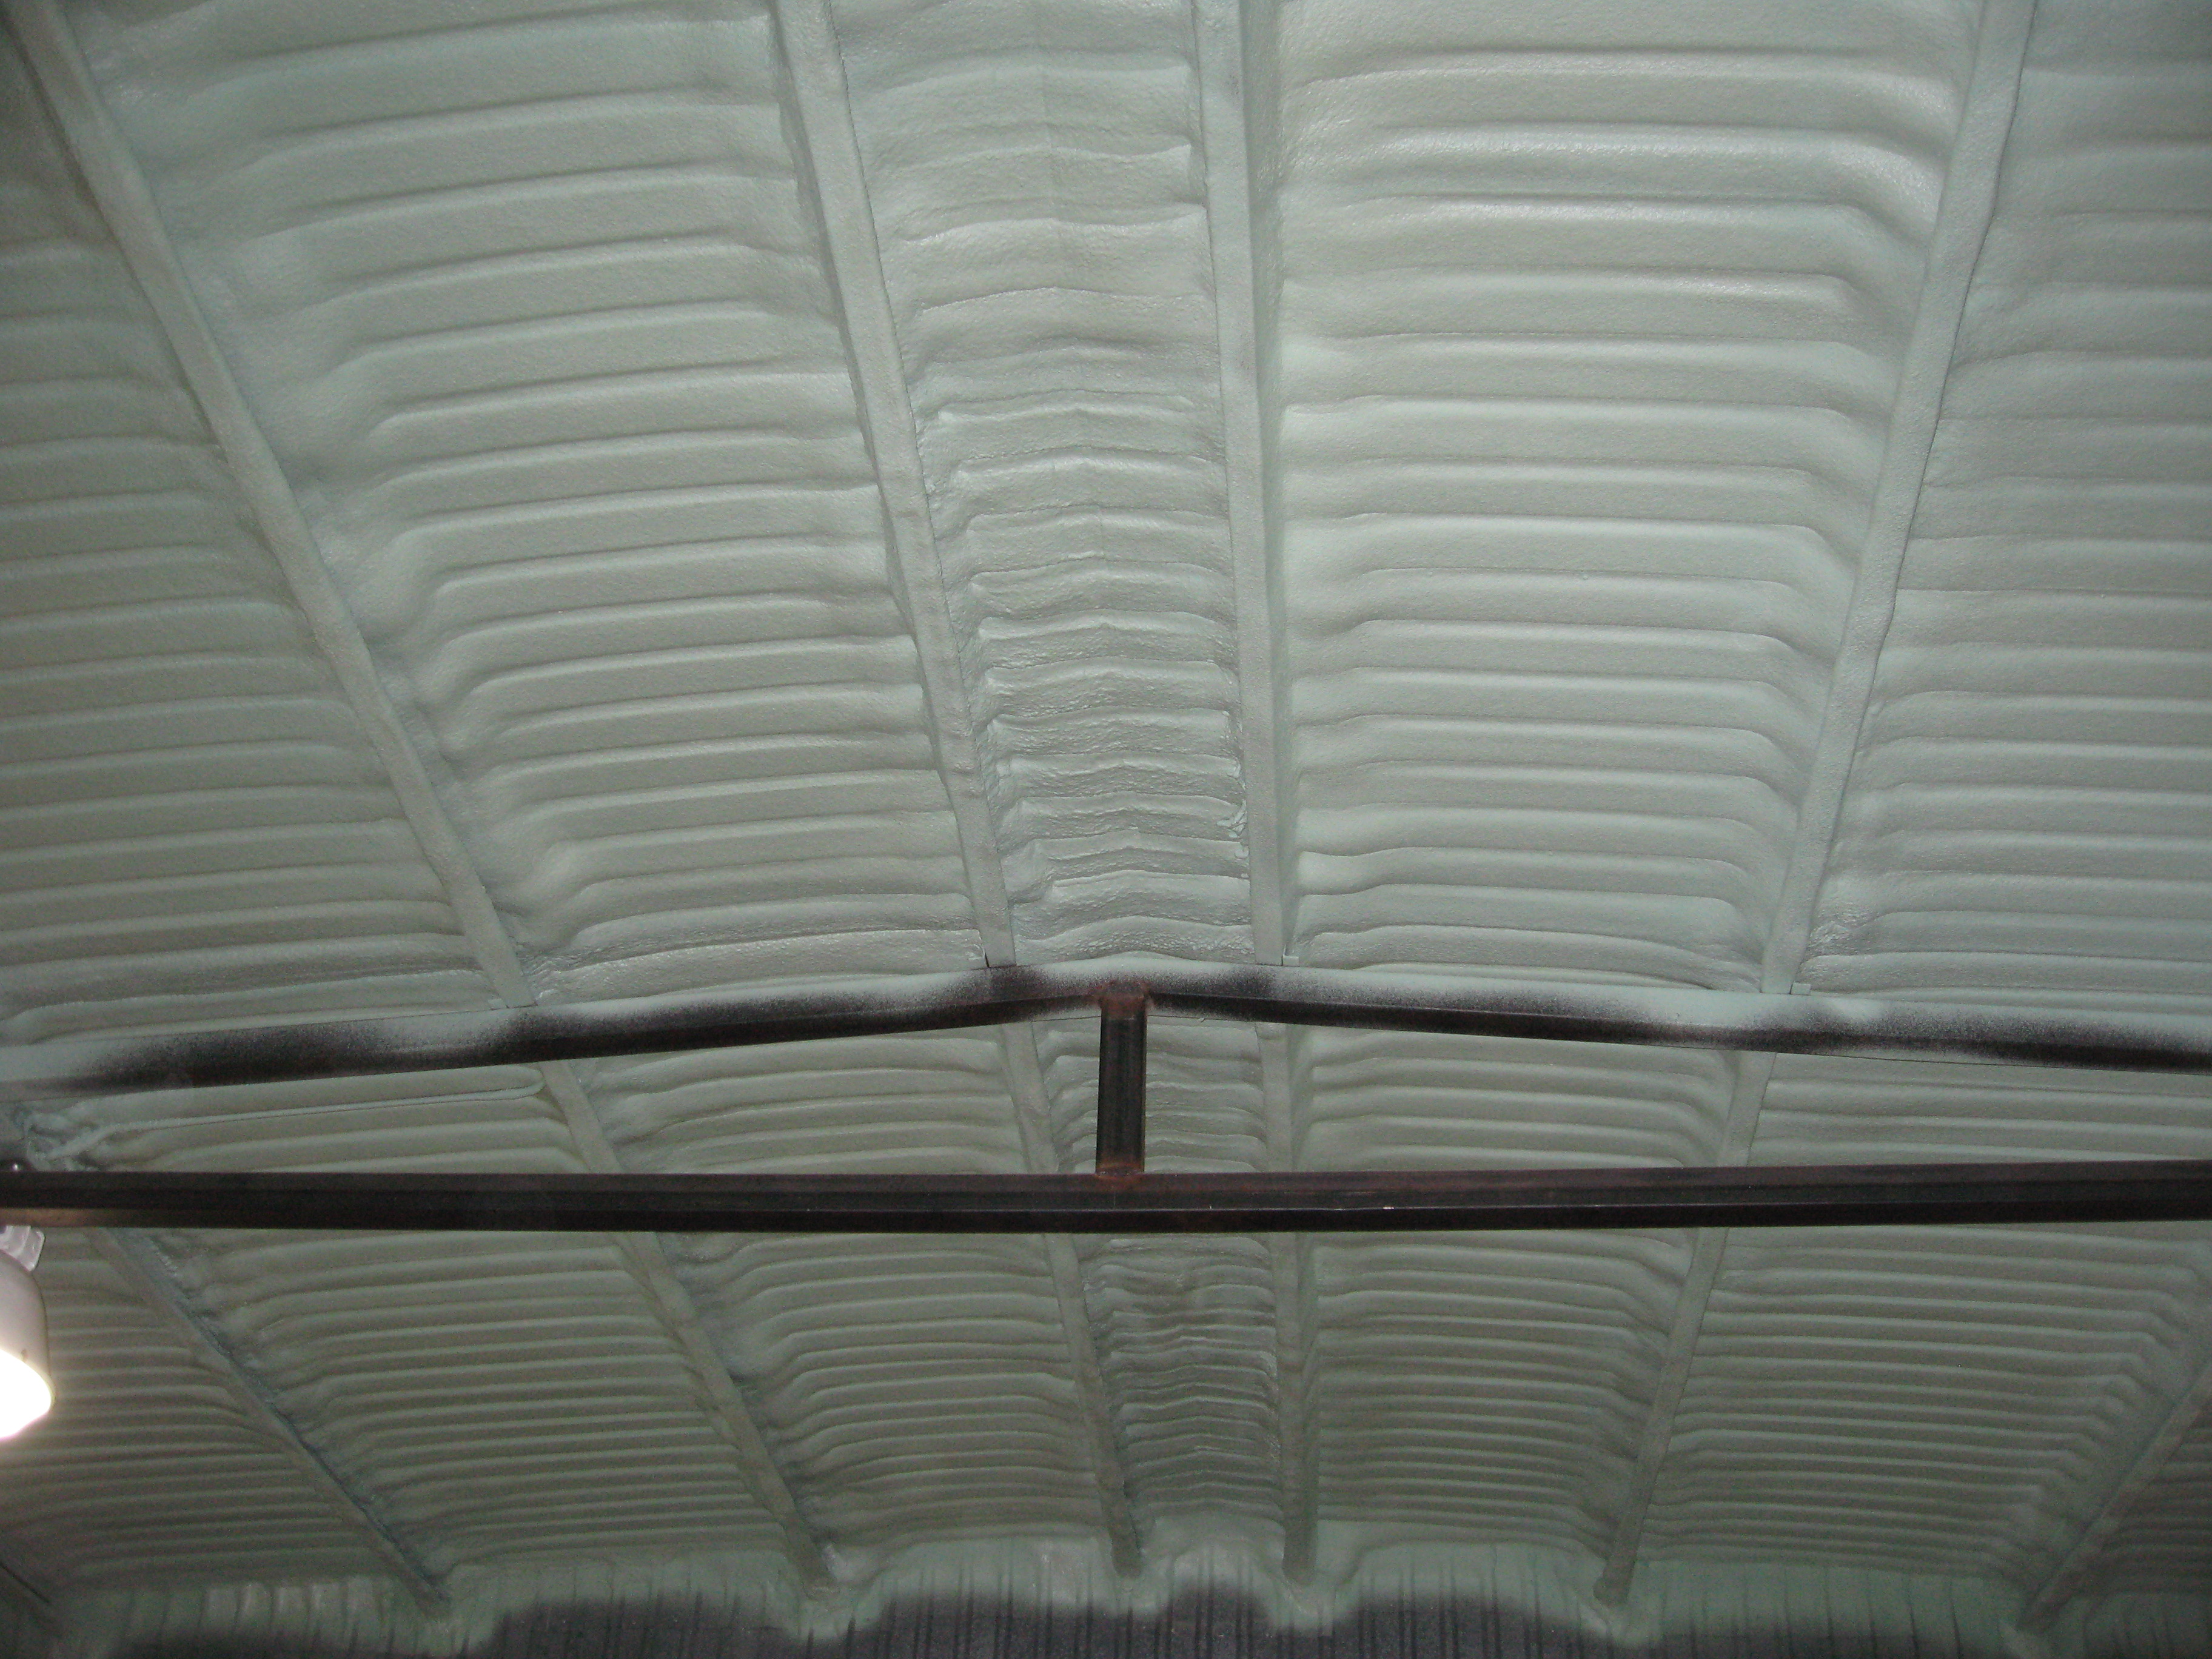 closed cell foam under metal roof